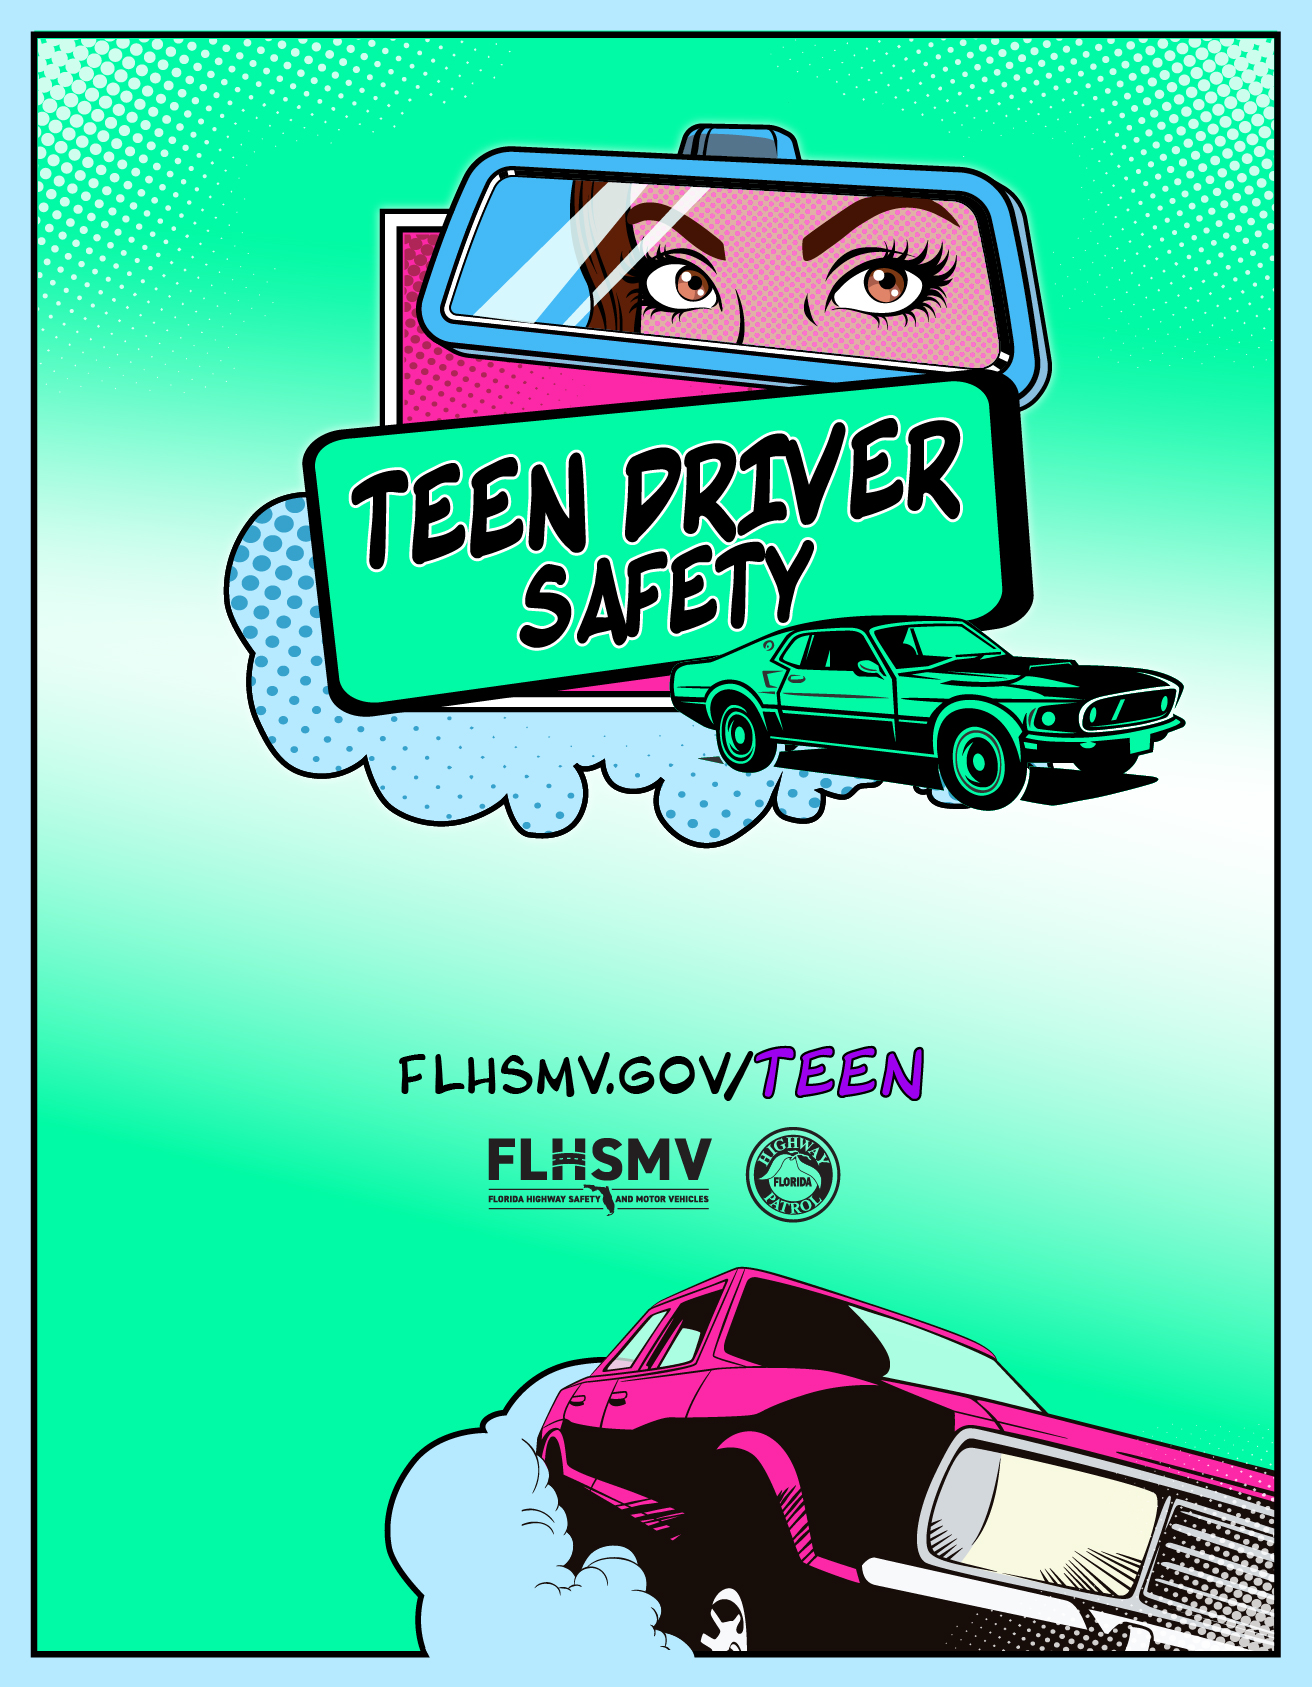 Teen poster 8.5 by 11